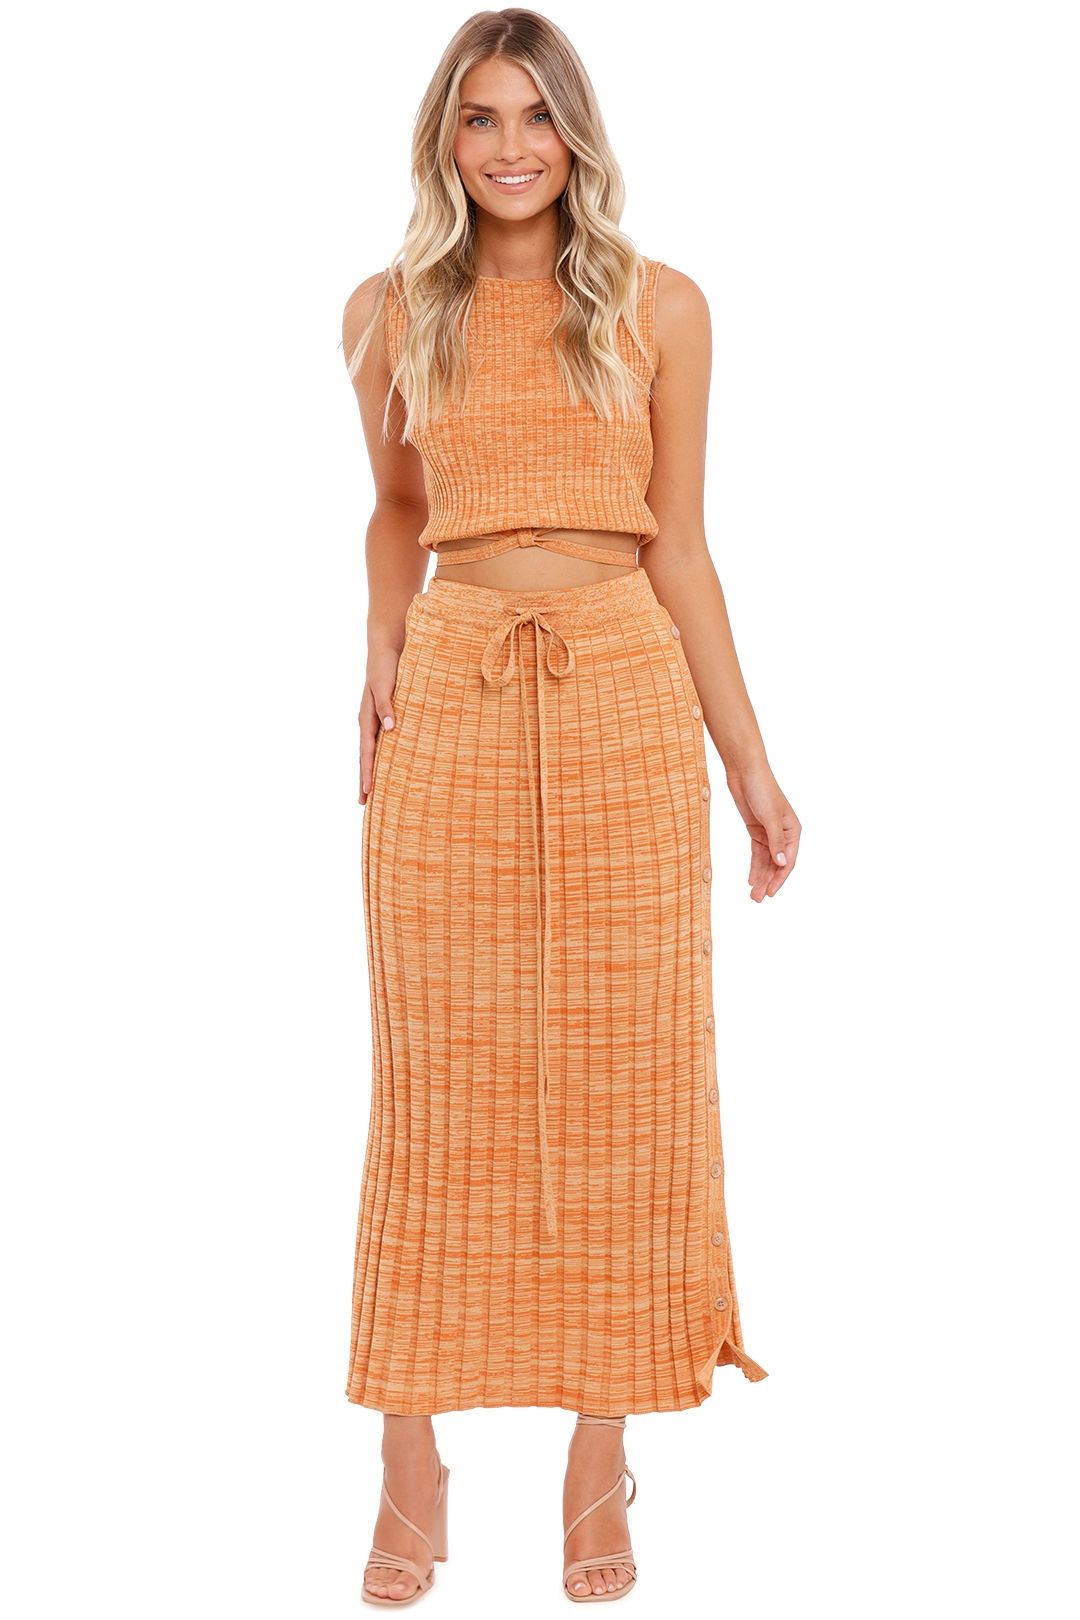 MINISTRY OF STYLE - Retrospective Knit Top And Skirt - Faded Citrus